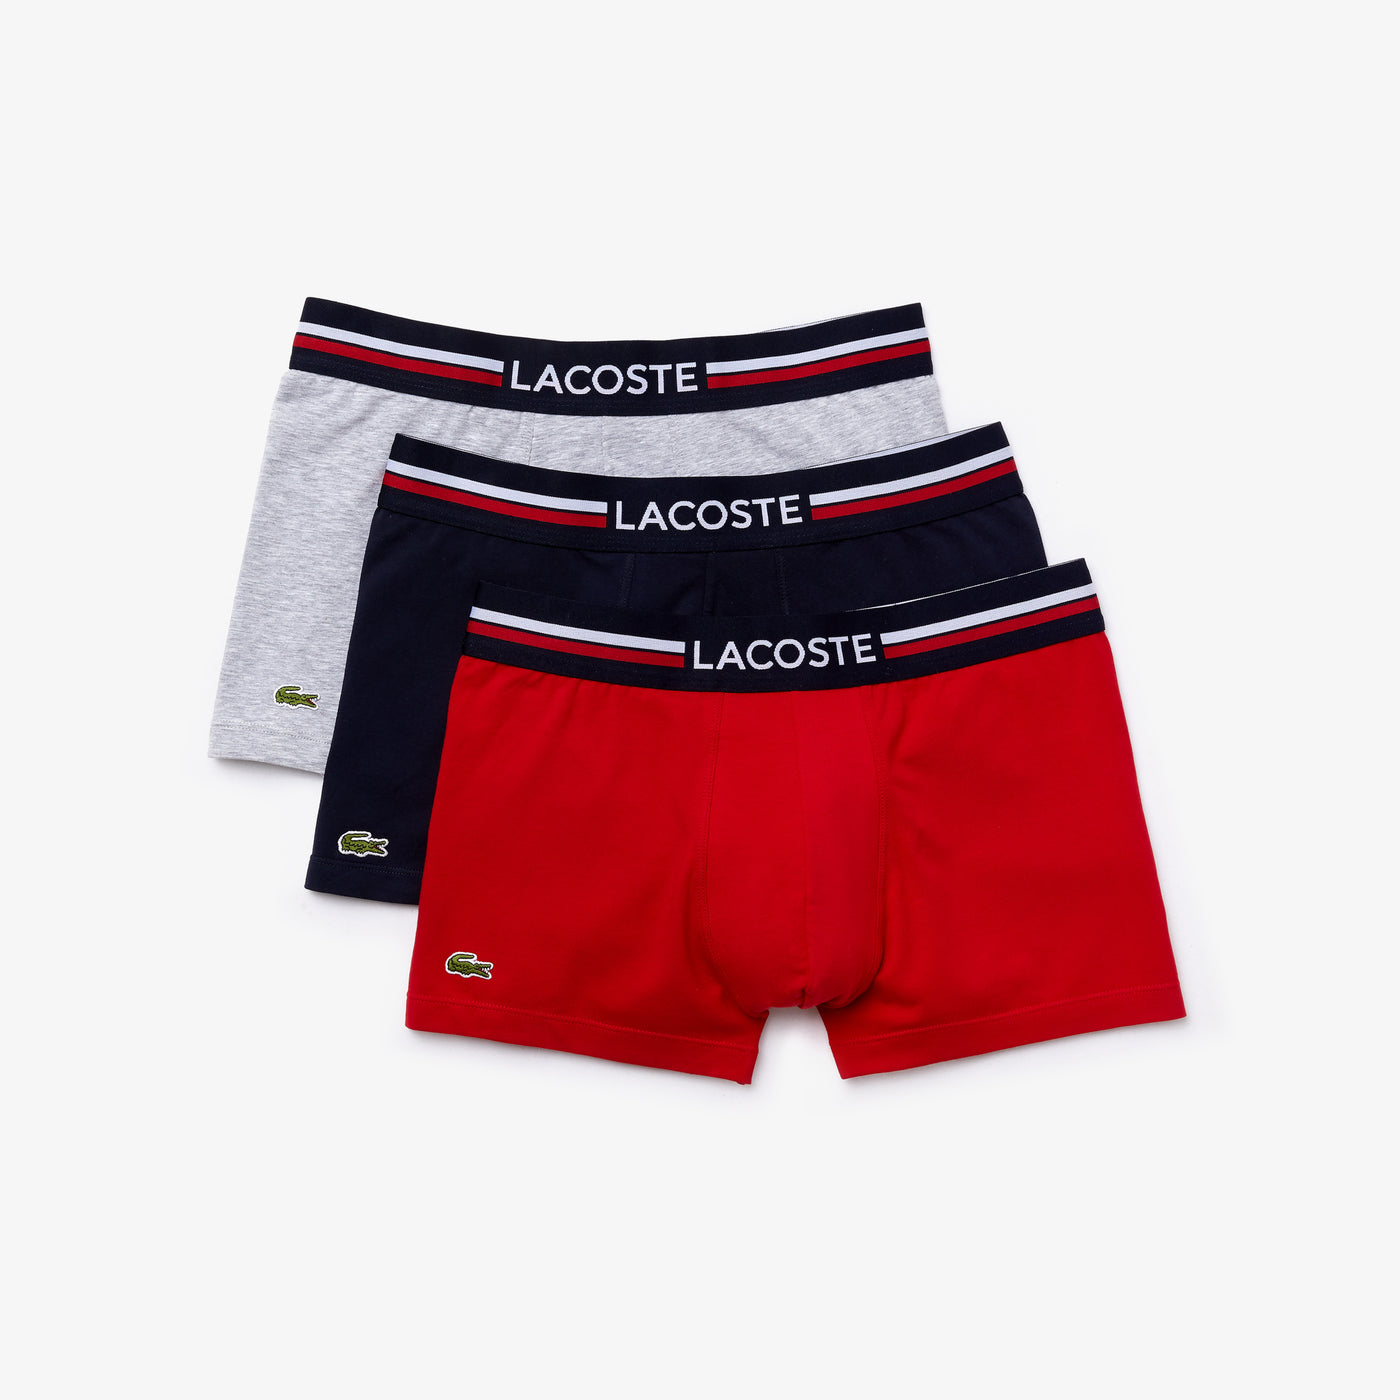 Shop The Latest Collection Of Lacoste Pack Of 3 Iconic Boxer Briefs With Three-Tone Waistband - 5H3386 In Lebanon